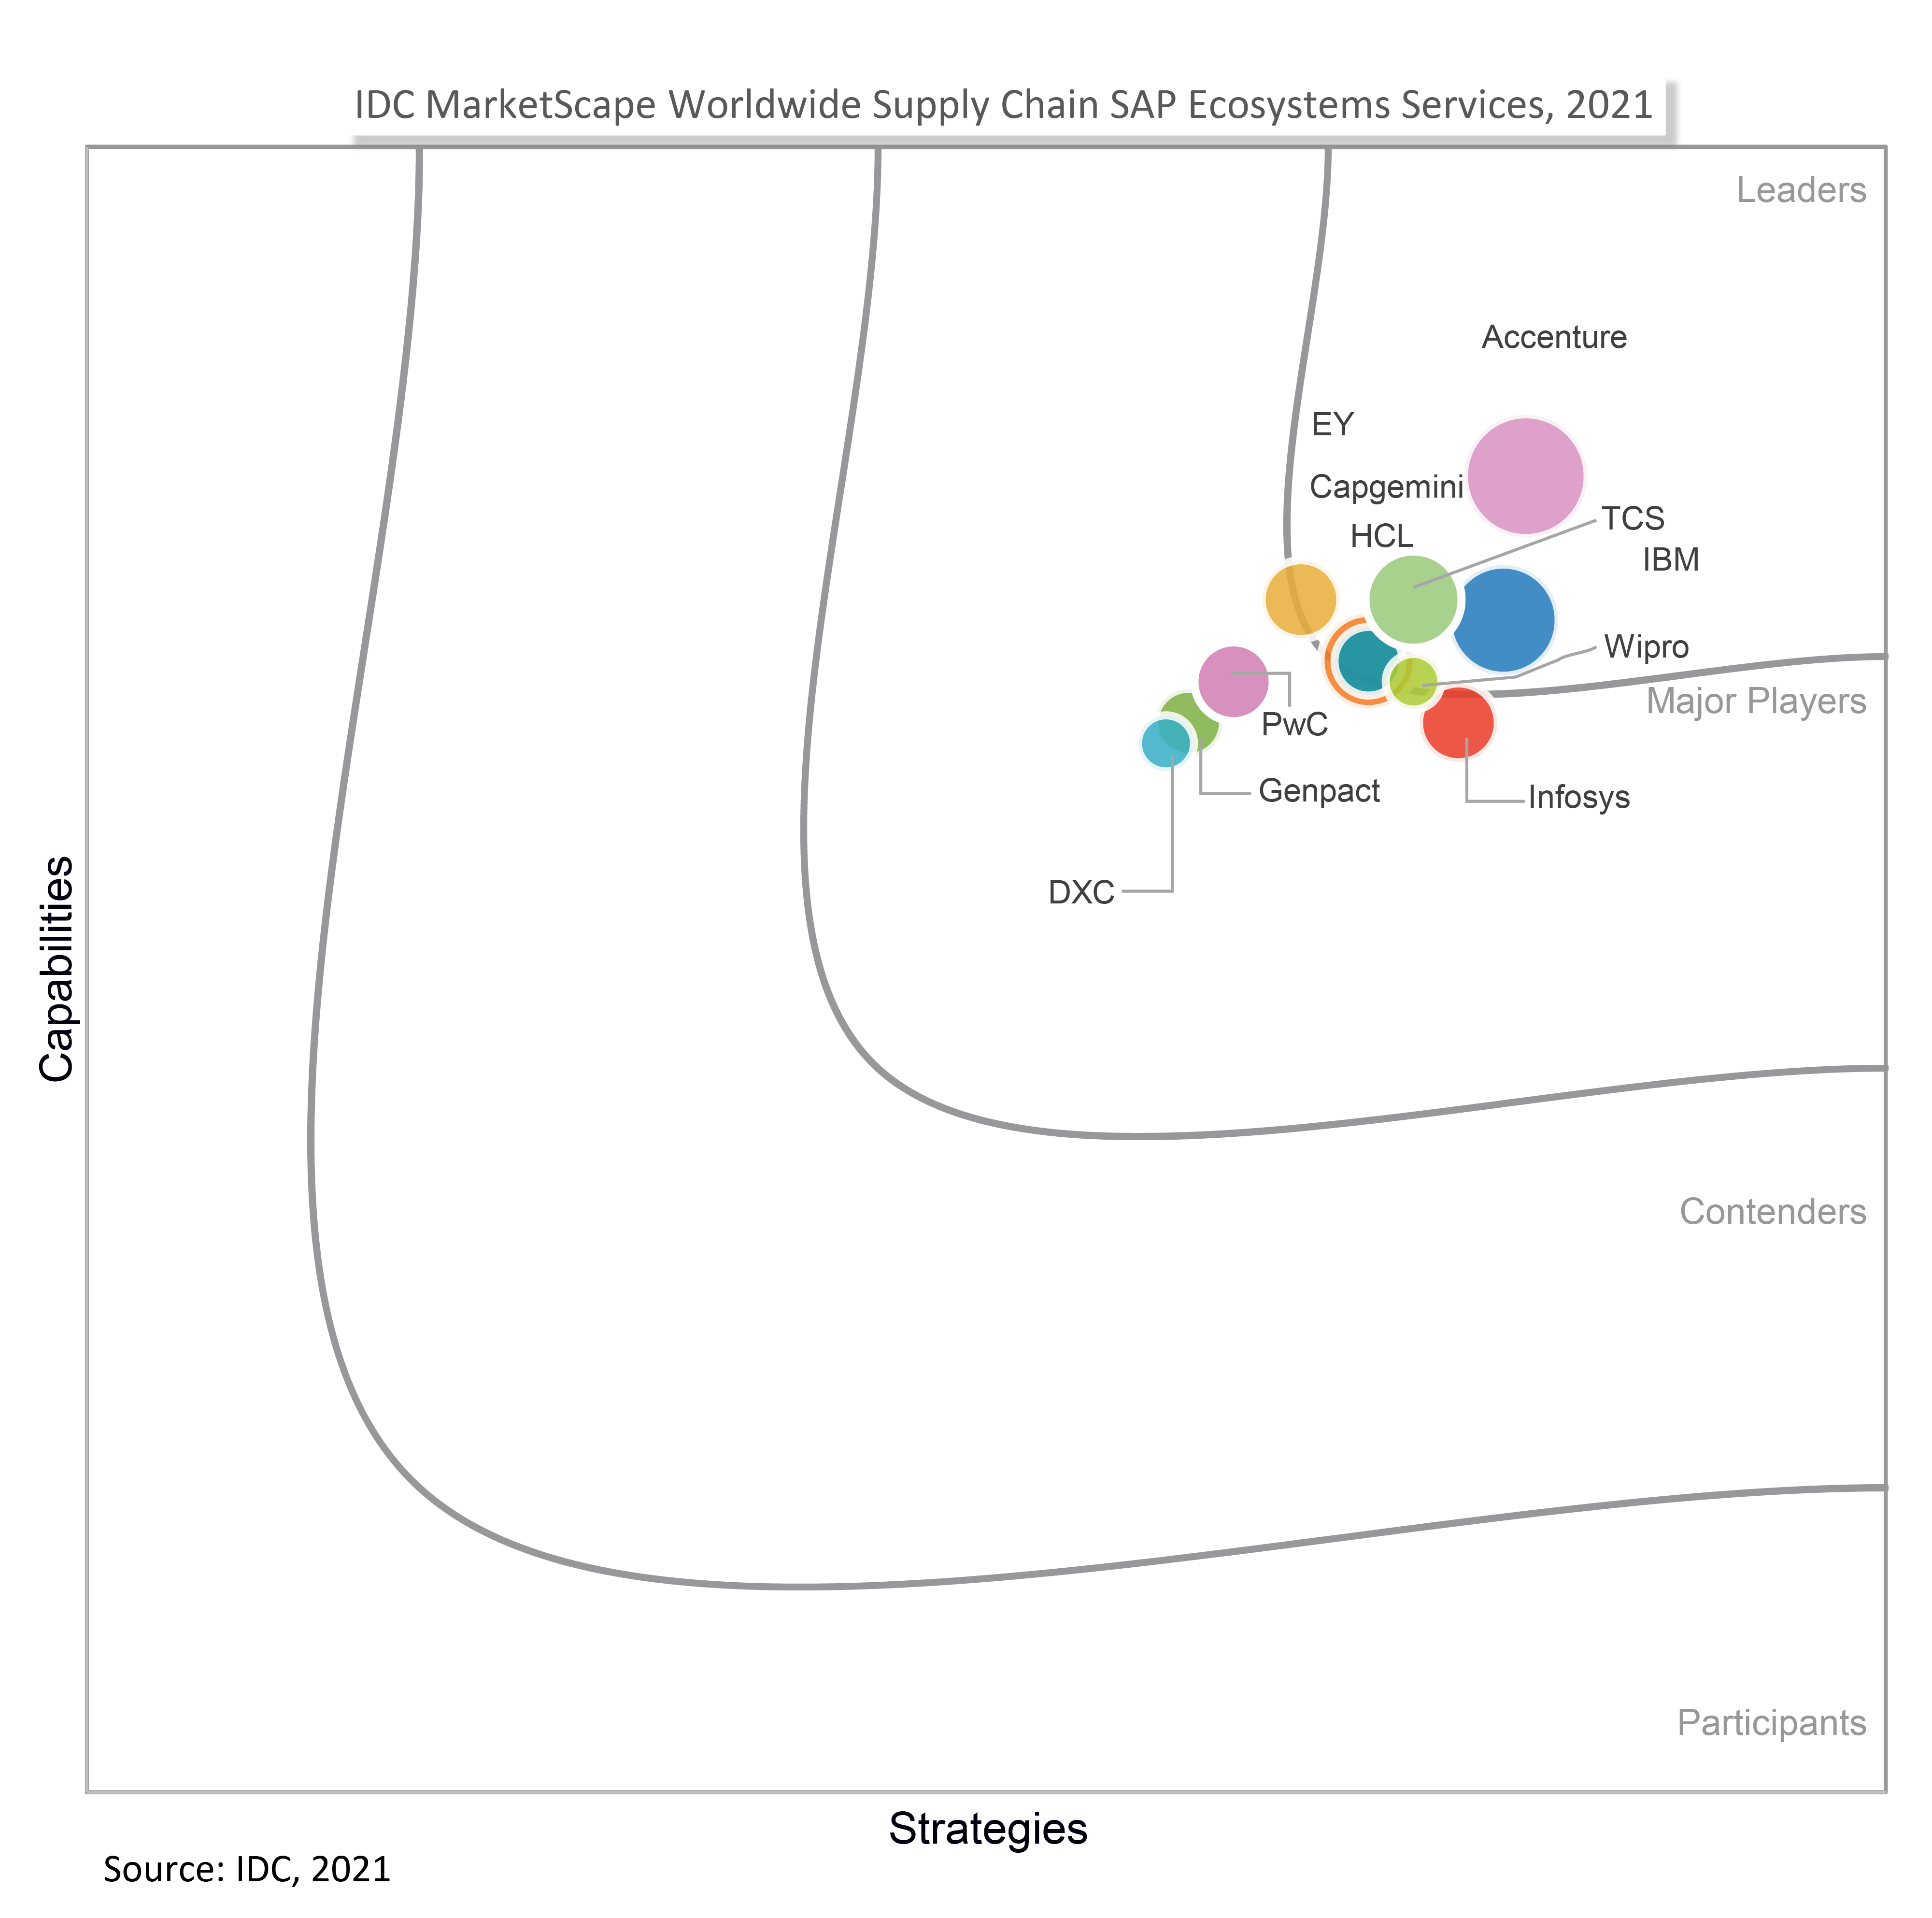 Wipro positioned as a “Leader” in IDC MarketScape: Worldwide Supply Chain SAP Ecosystems Services 2021 Vendor Assessment